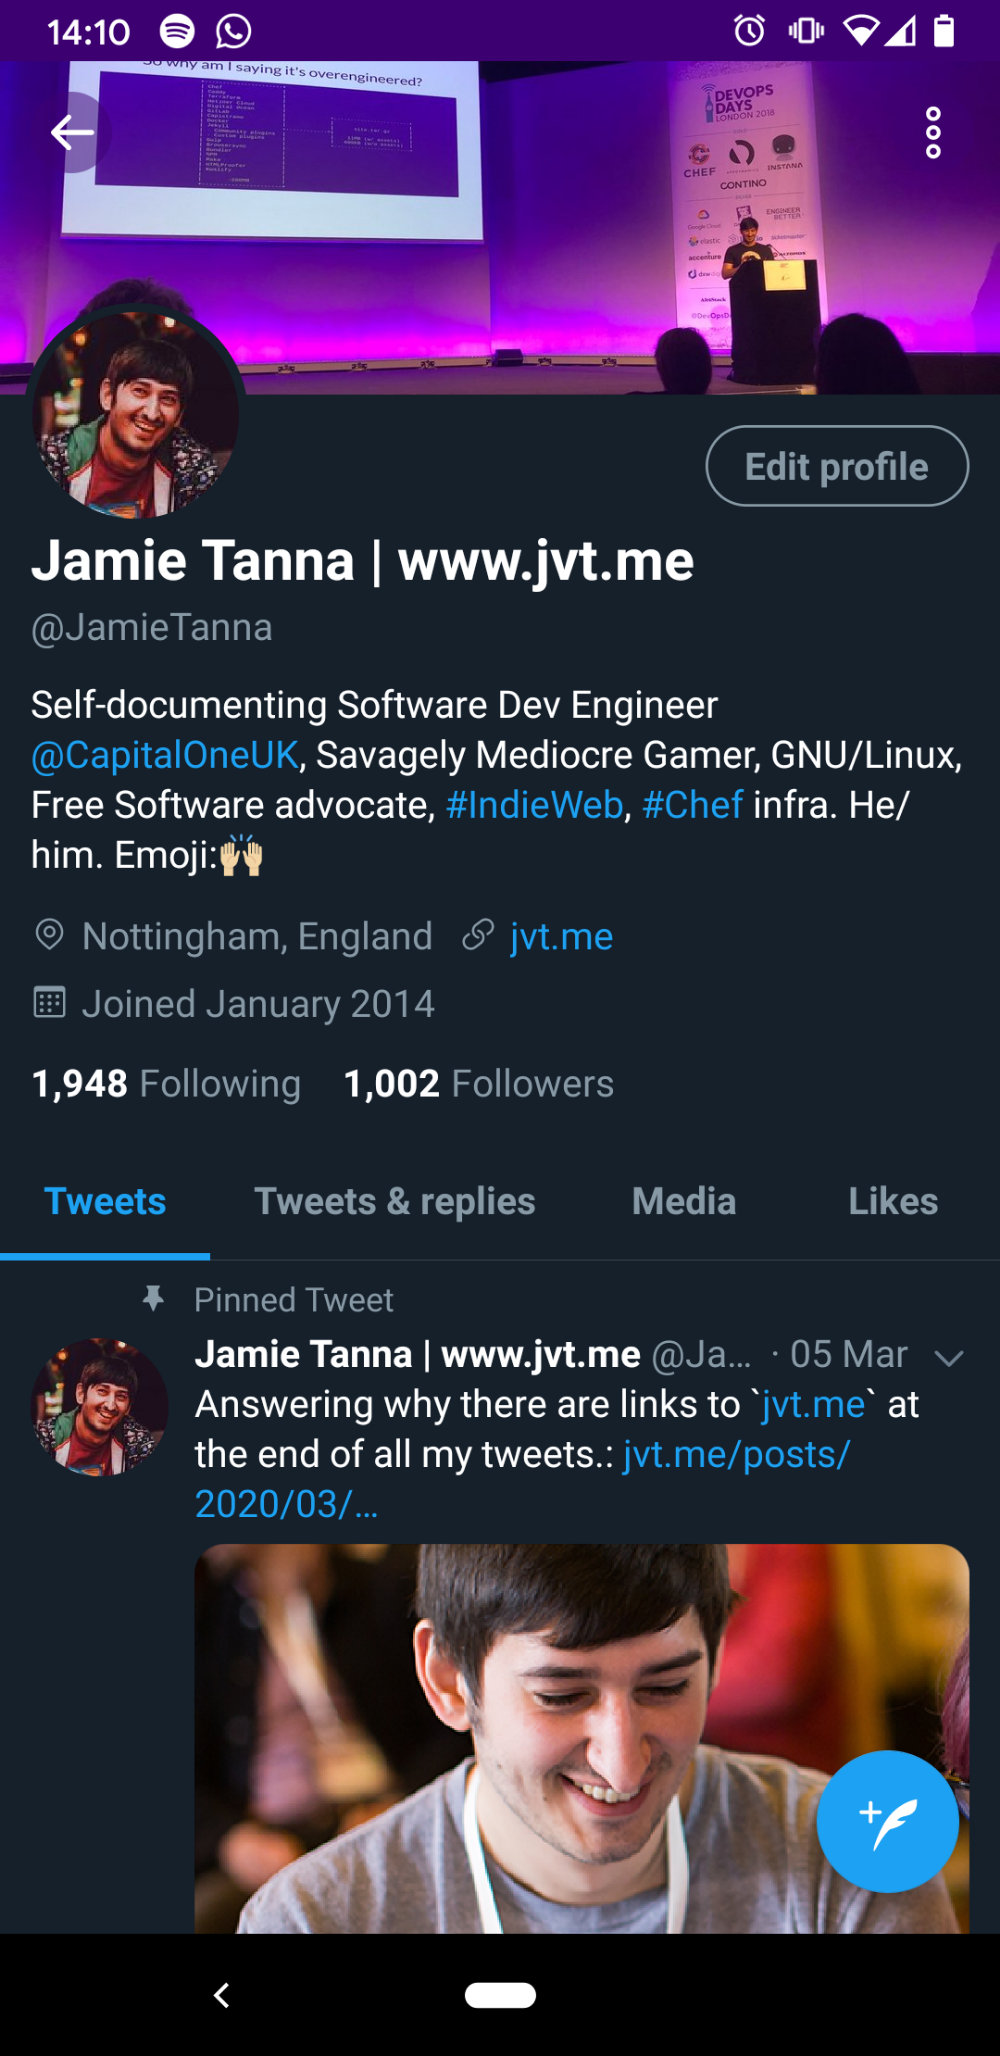 Jamie's twitter bio, which shows his pronouns as "he/him"